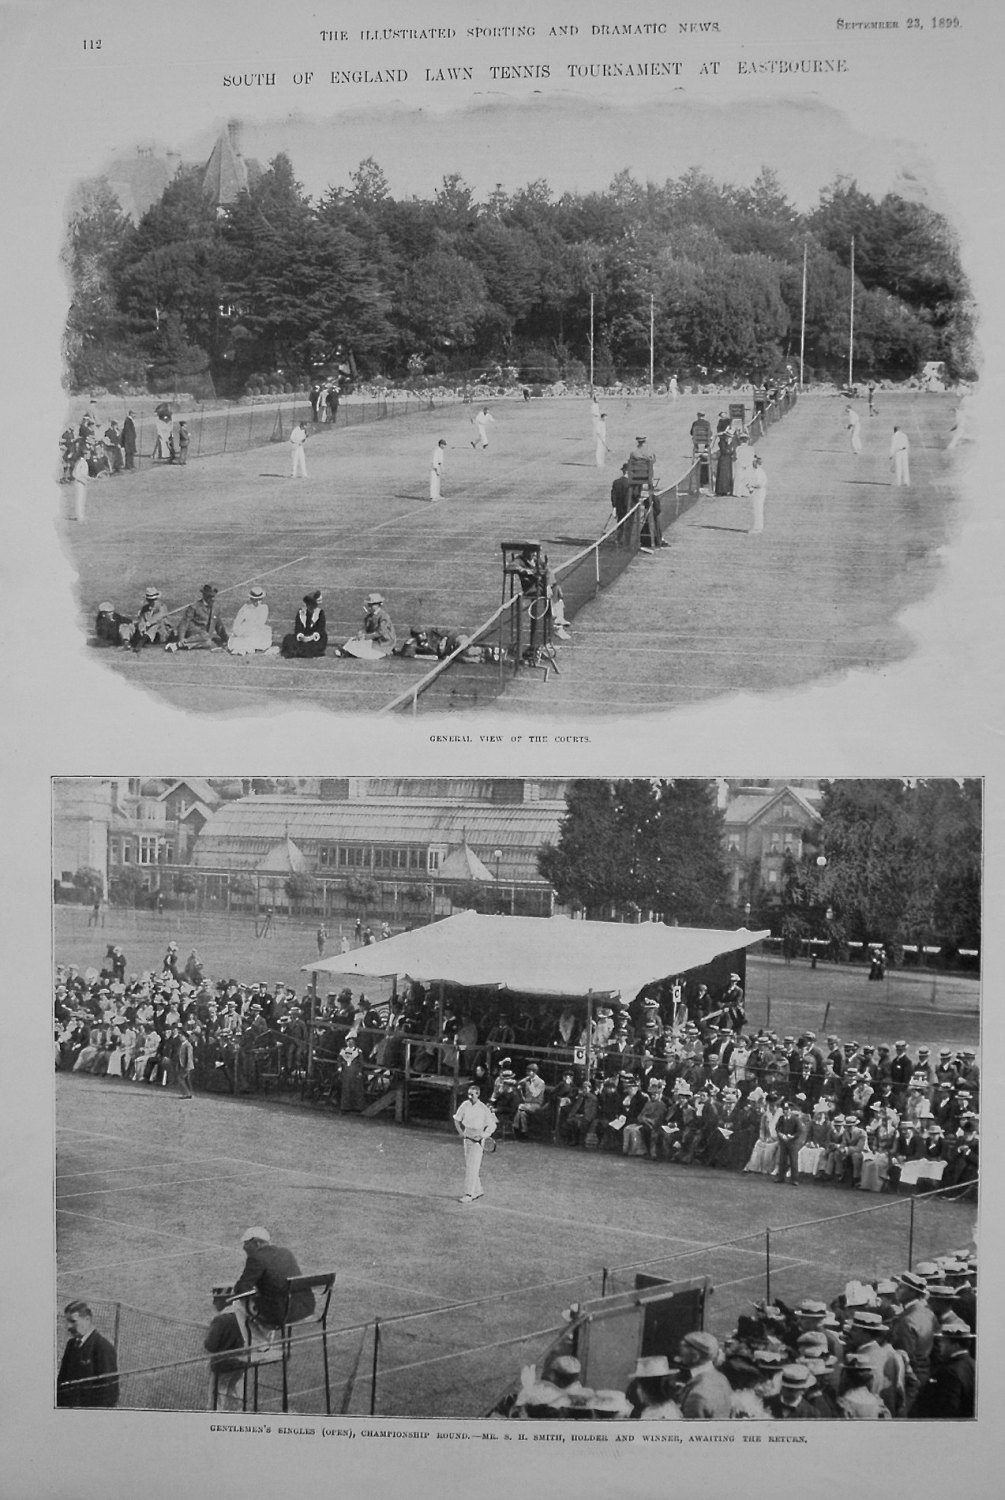 South of England Lawn Tennis Tournament at Eastbourne. 1899